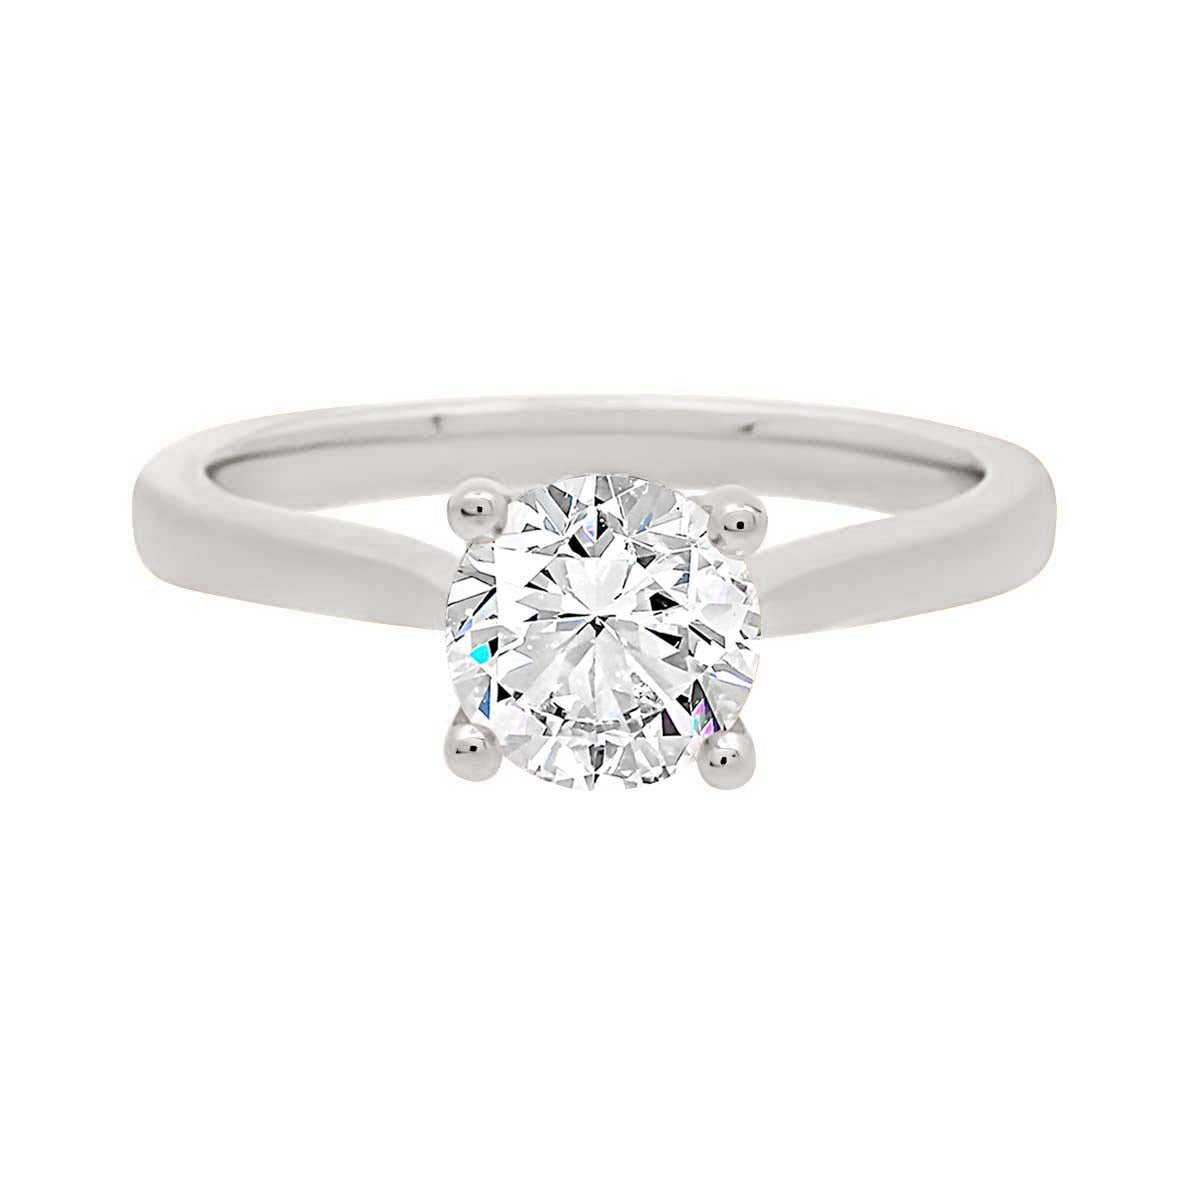 Hidden Halo Solitaire Engagement Ring in white gold laying flat